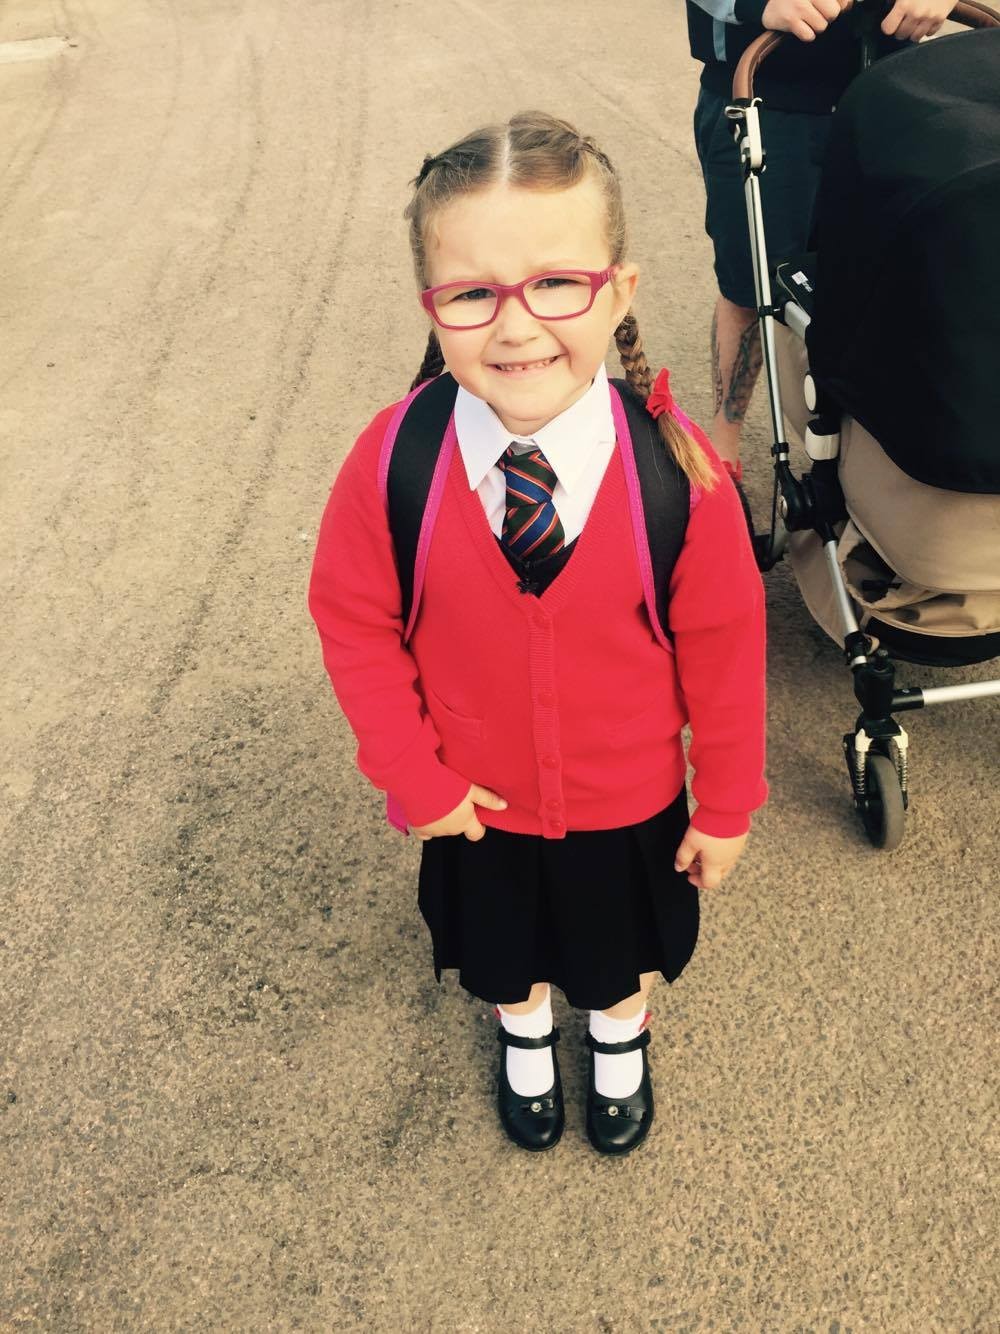 Nicola sent this cute pic of Ayla all ready for her first day at school, super cute!